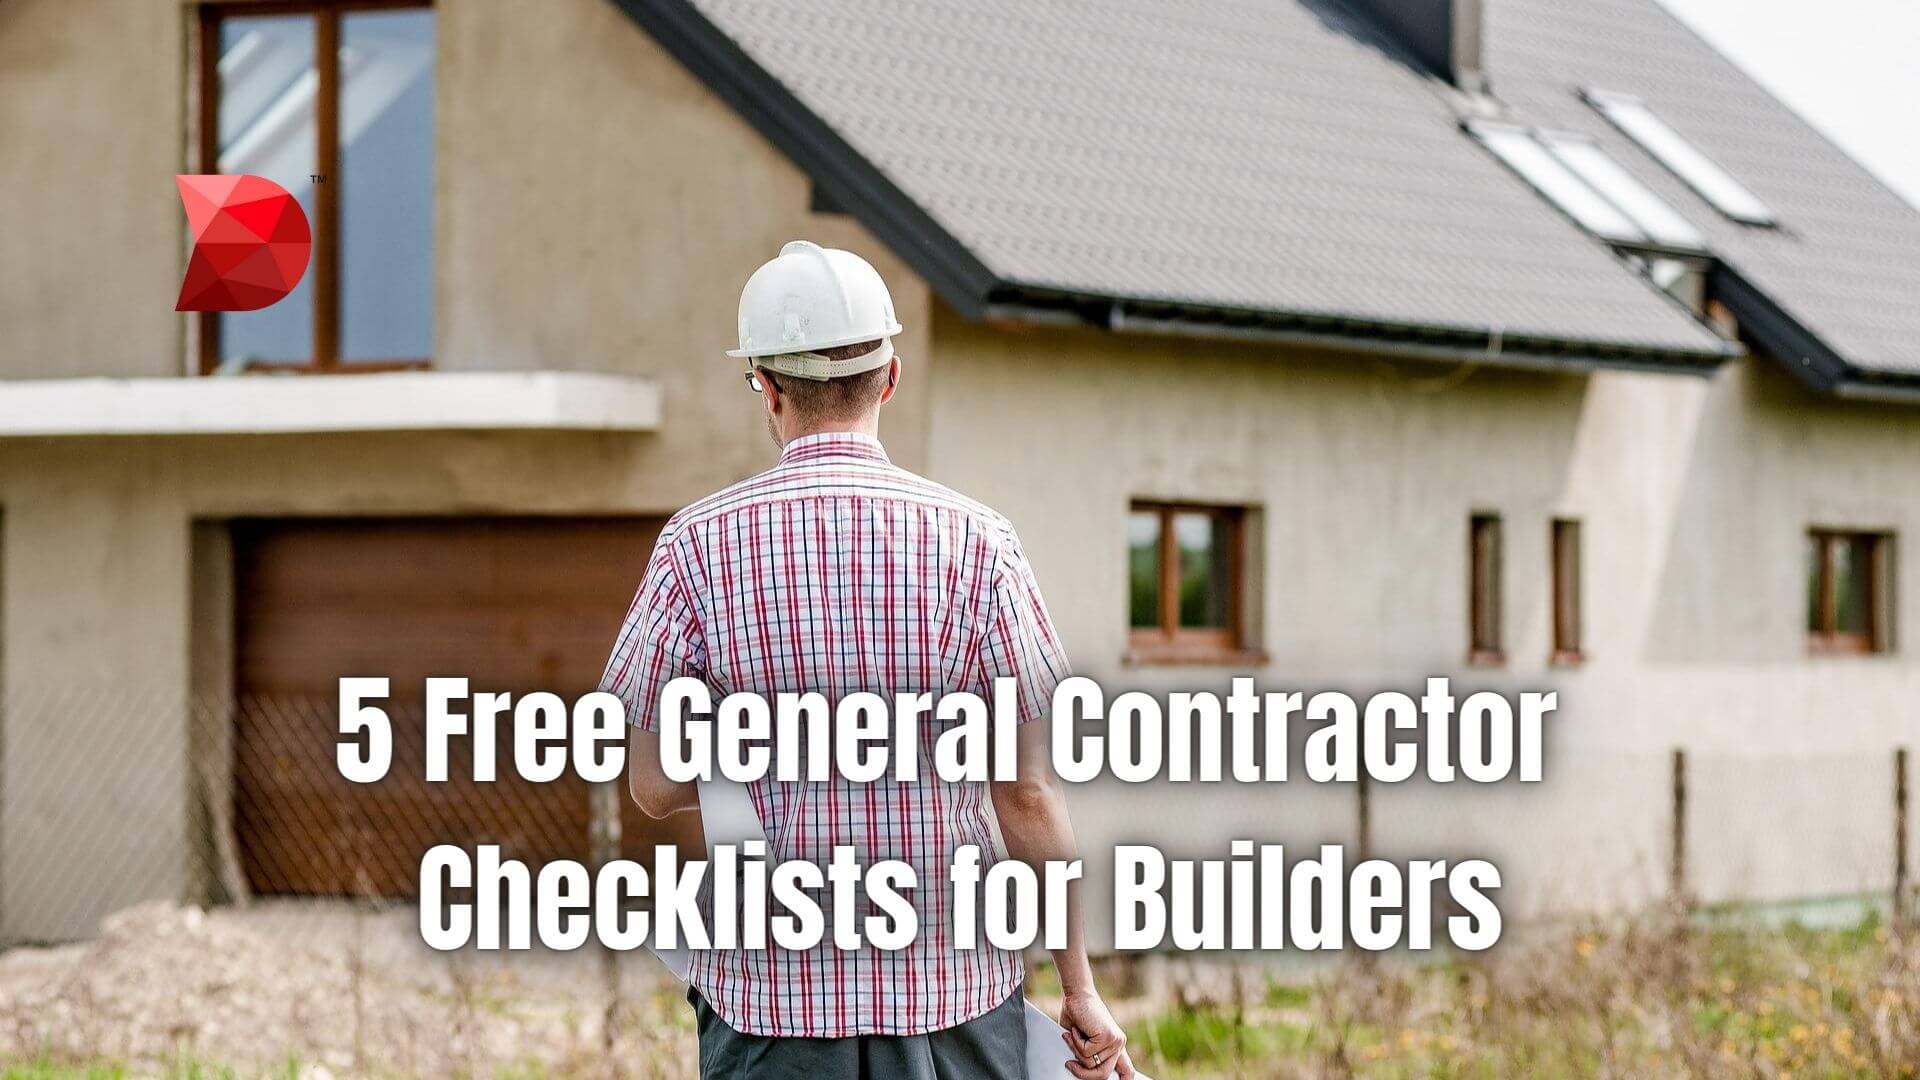 5 Free General Contractor Checklists for Builders